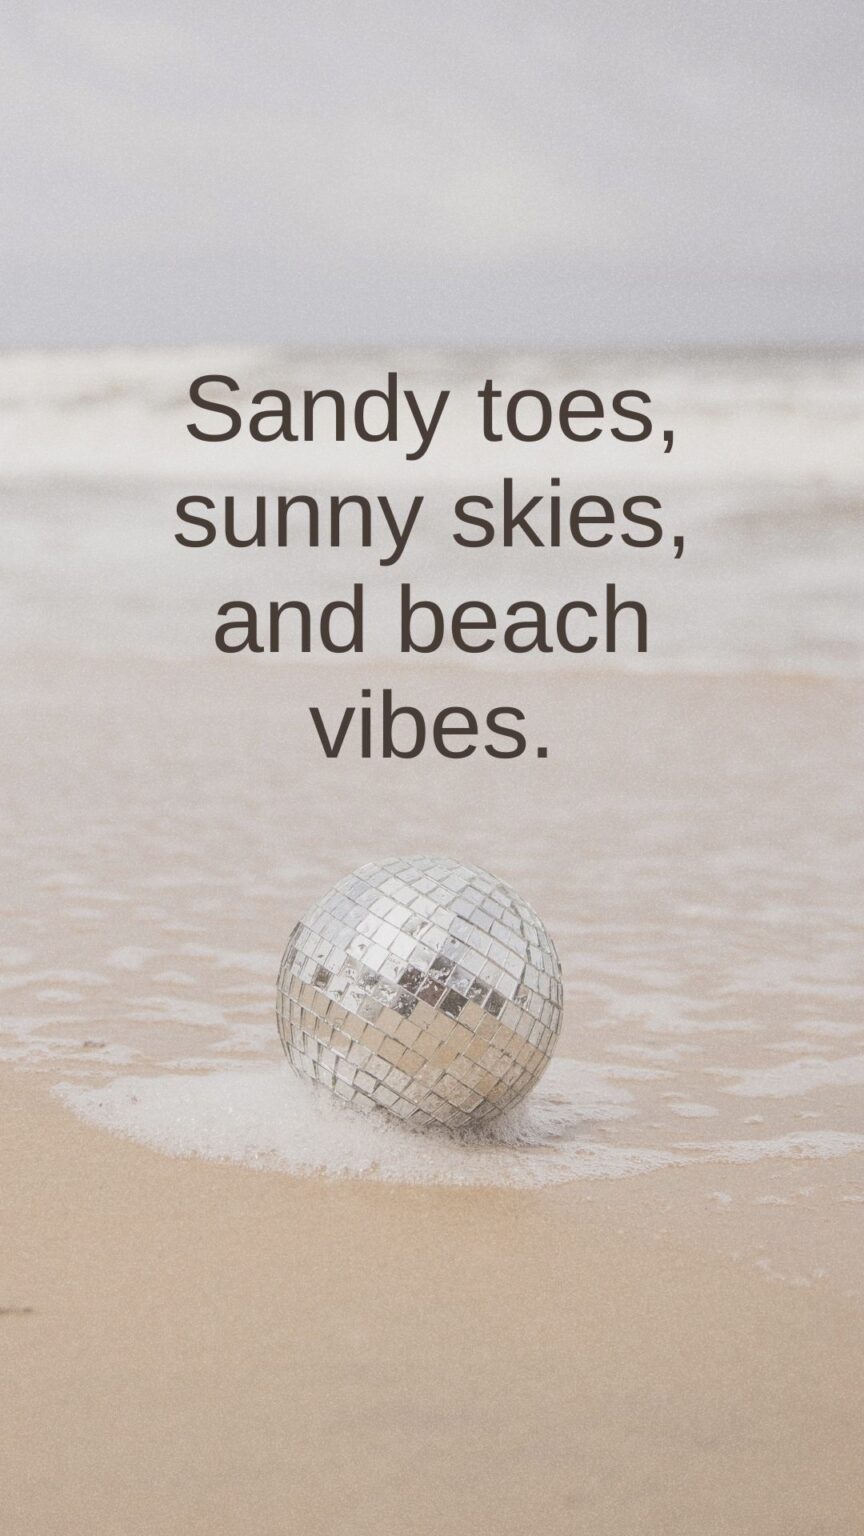 Beach Quotes And Captions 1 864x1536 